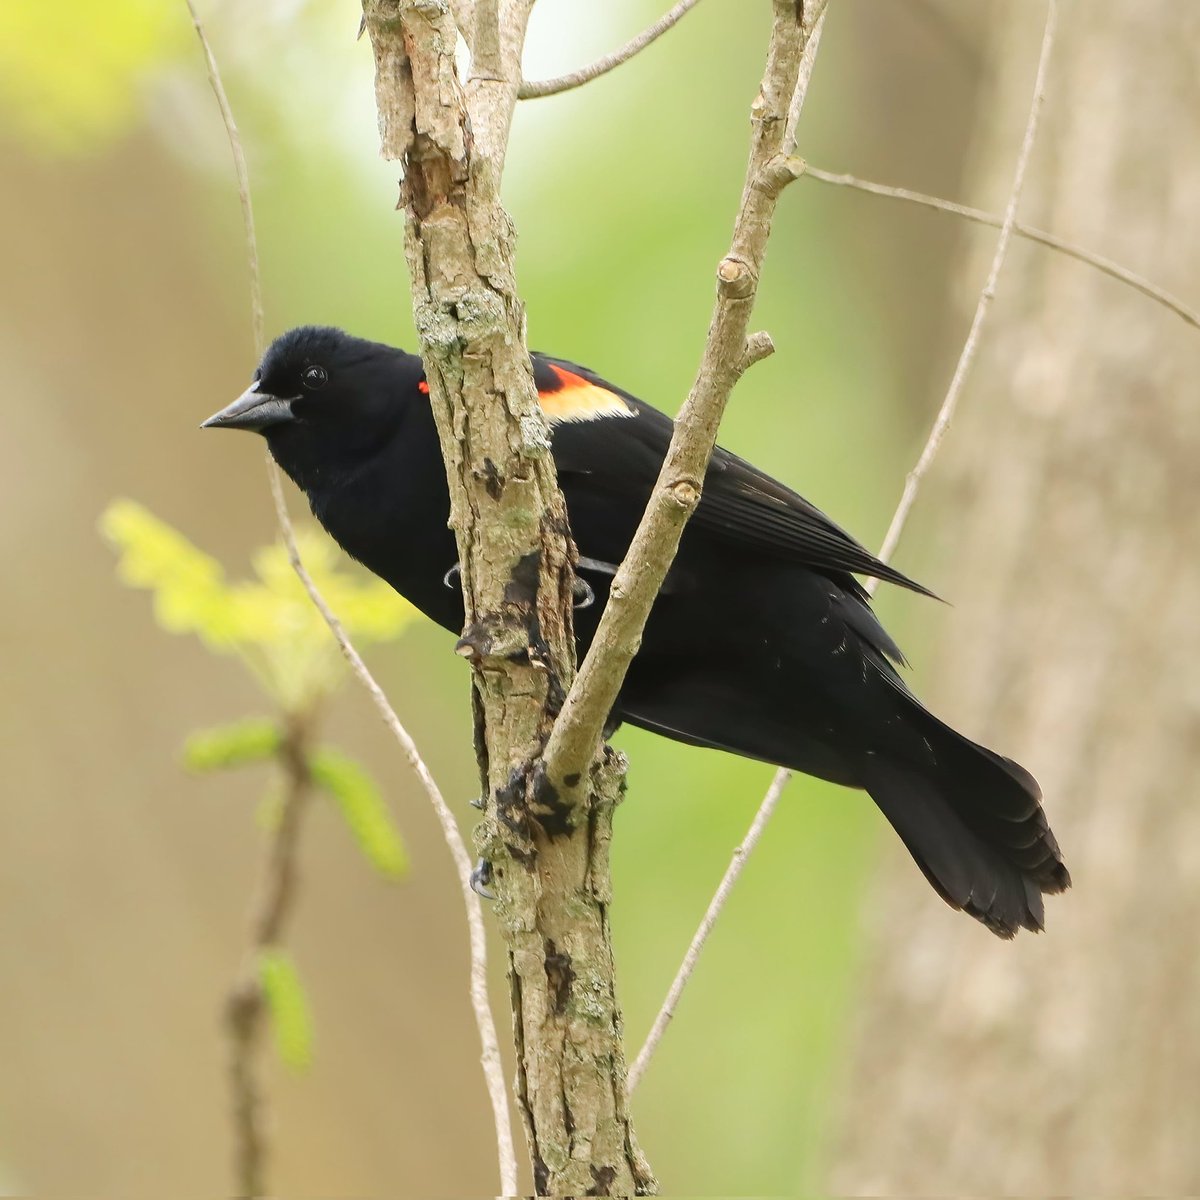 Did you know that the red-winged blackbird is a highly polygynous species? Males have many female mates and, according to one source, up to 15 in some cases! #didyouknow #birdknowledge #redwingedblackbirds #redwingedblackbird #birdlovers #ohiobirdworld #ohiobirdlovers